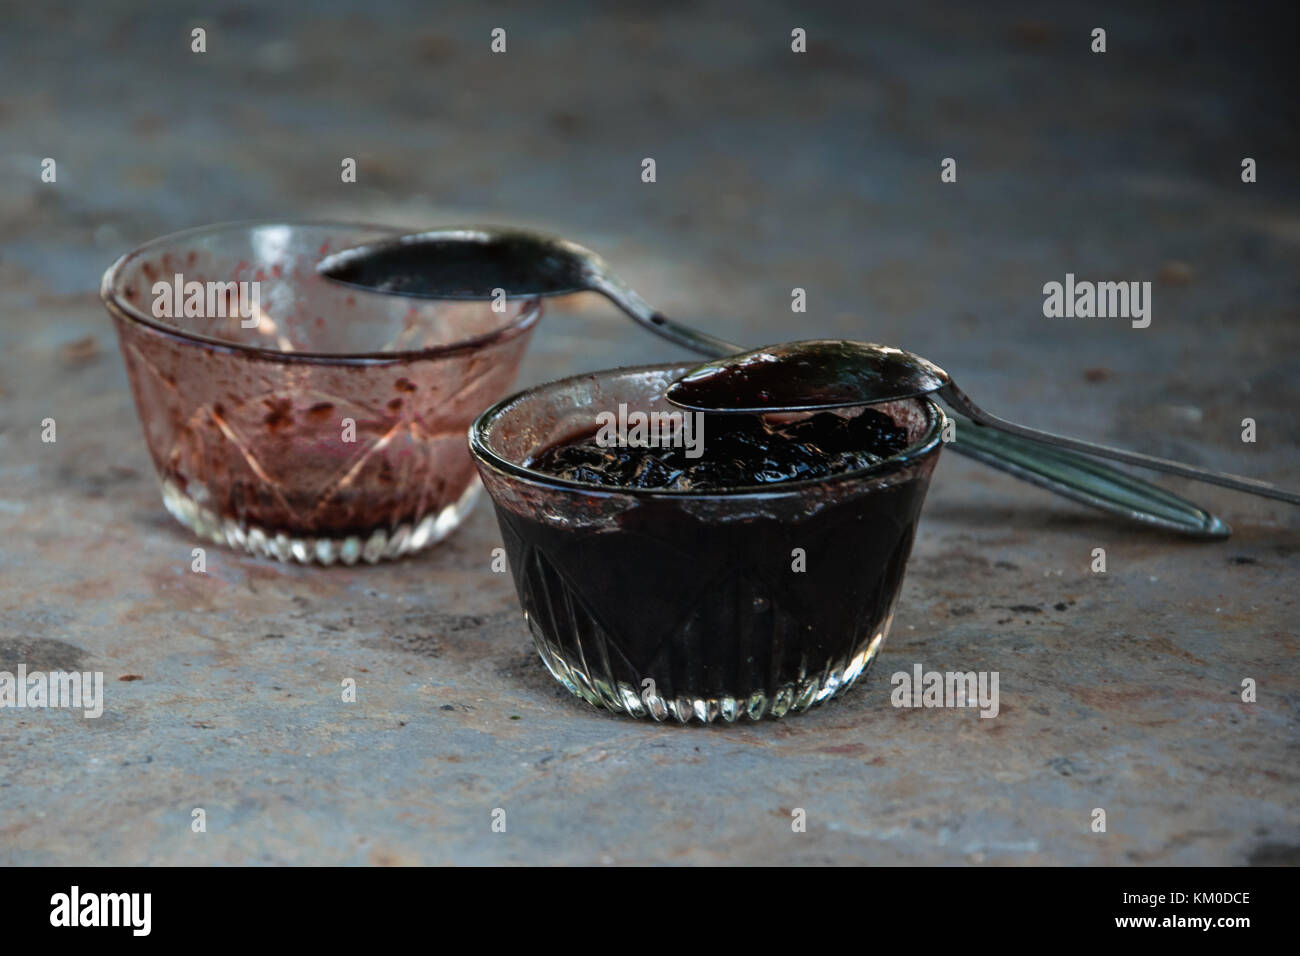 Two bowls of homemade jam, one is empty and one is full. Greedy concept Stock Photo